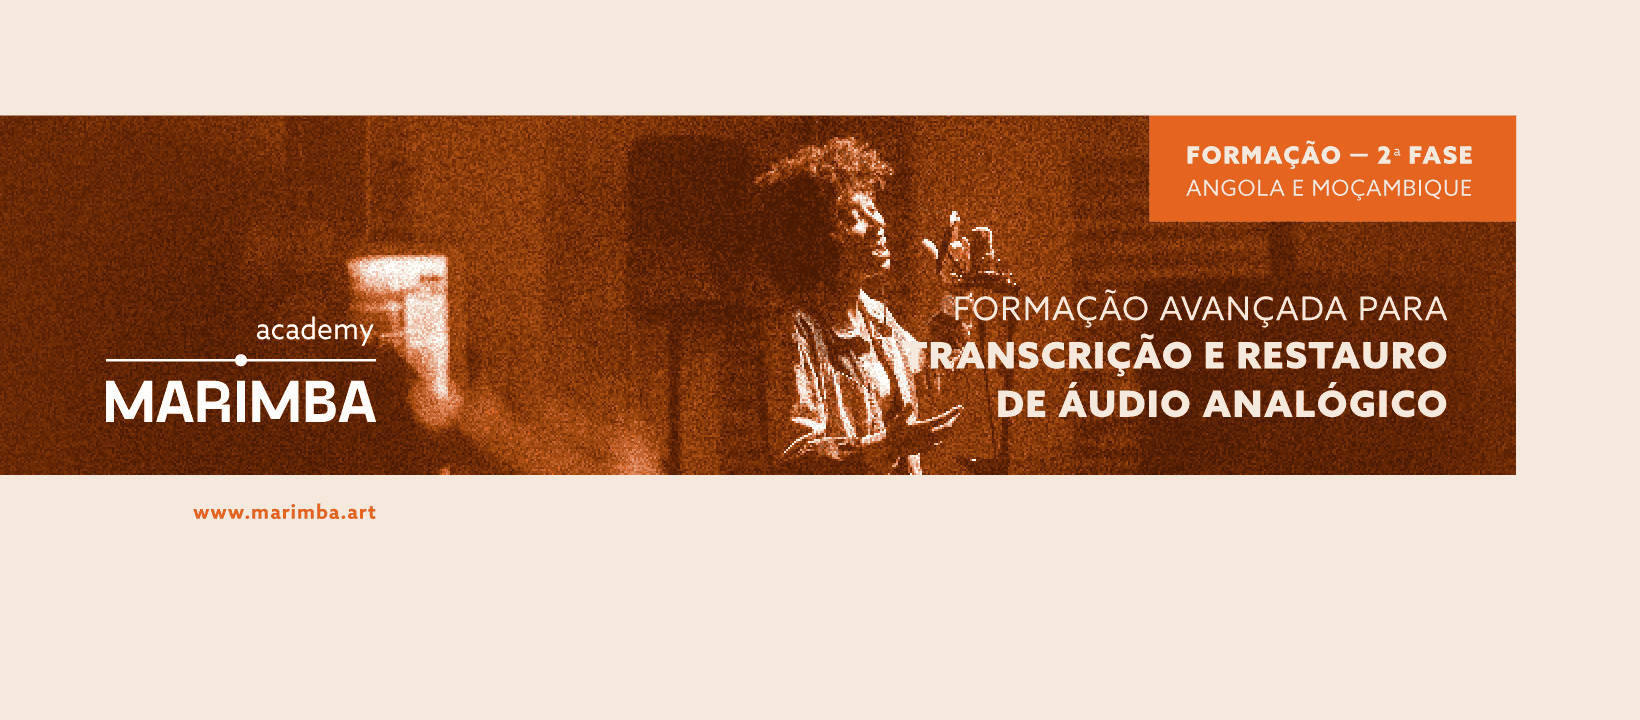 Formacao_2a fase_Facebook Cover .png